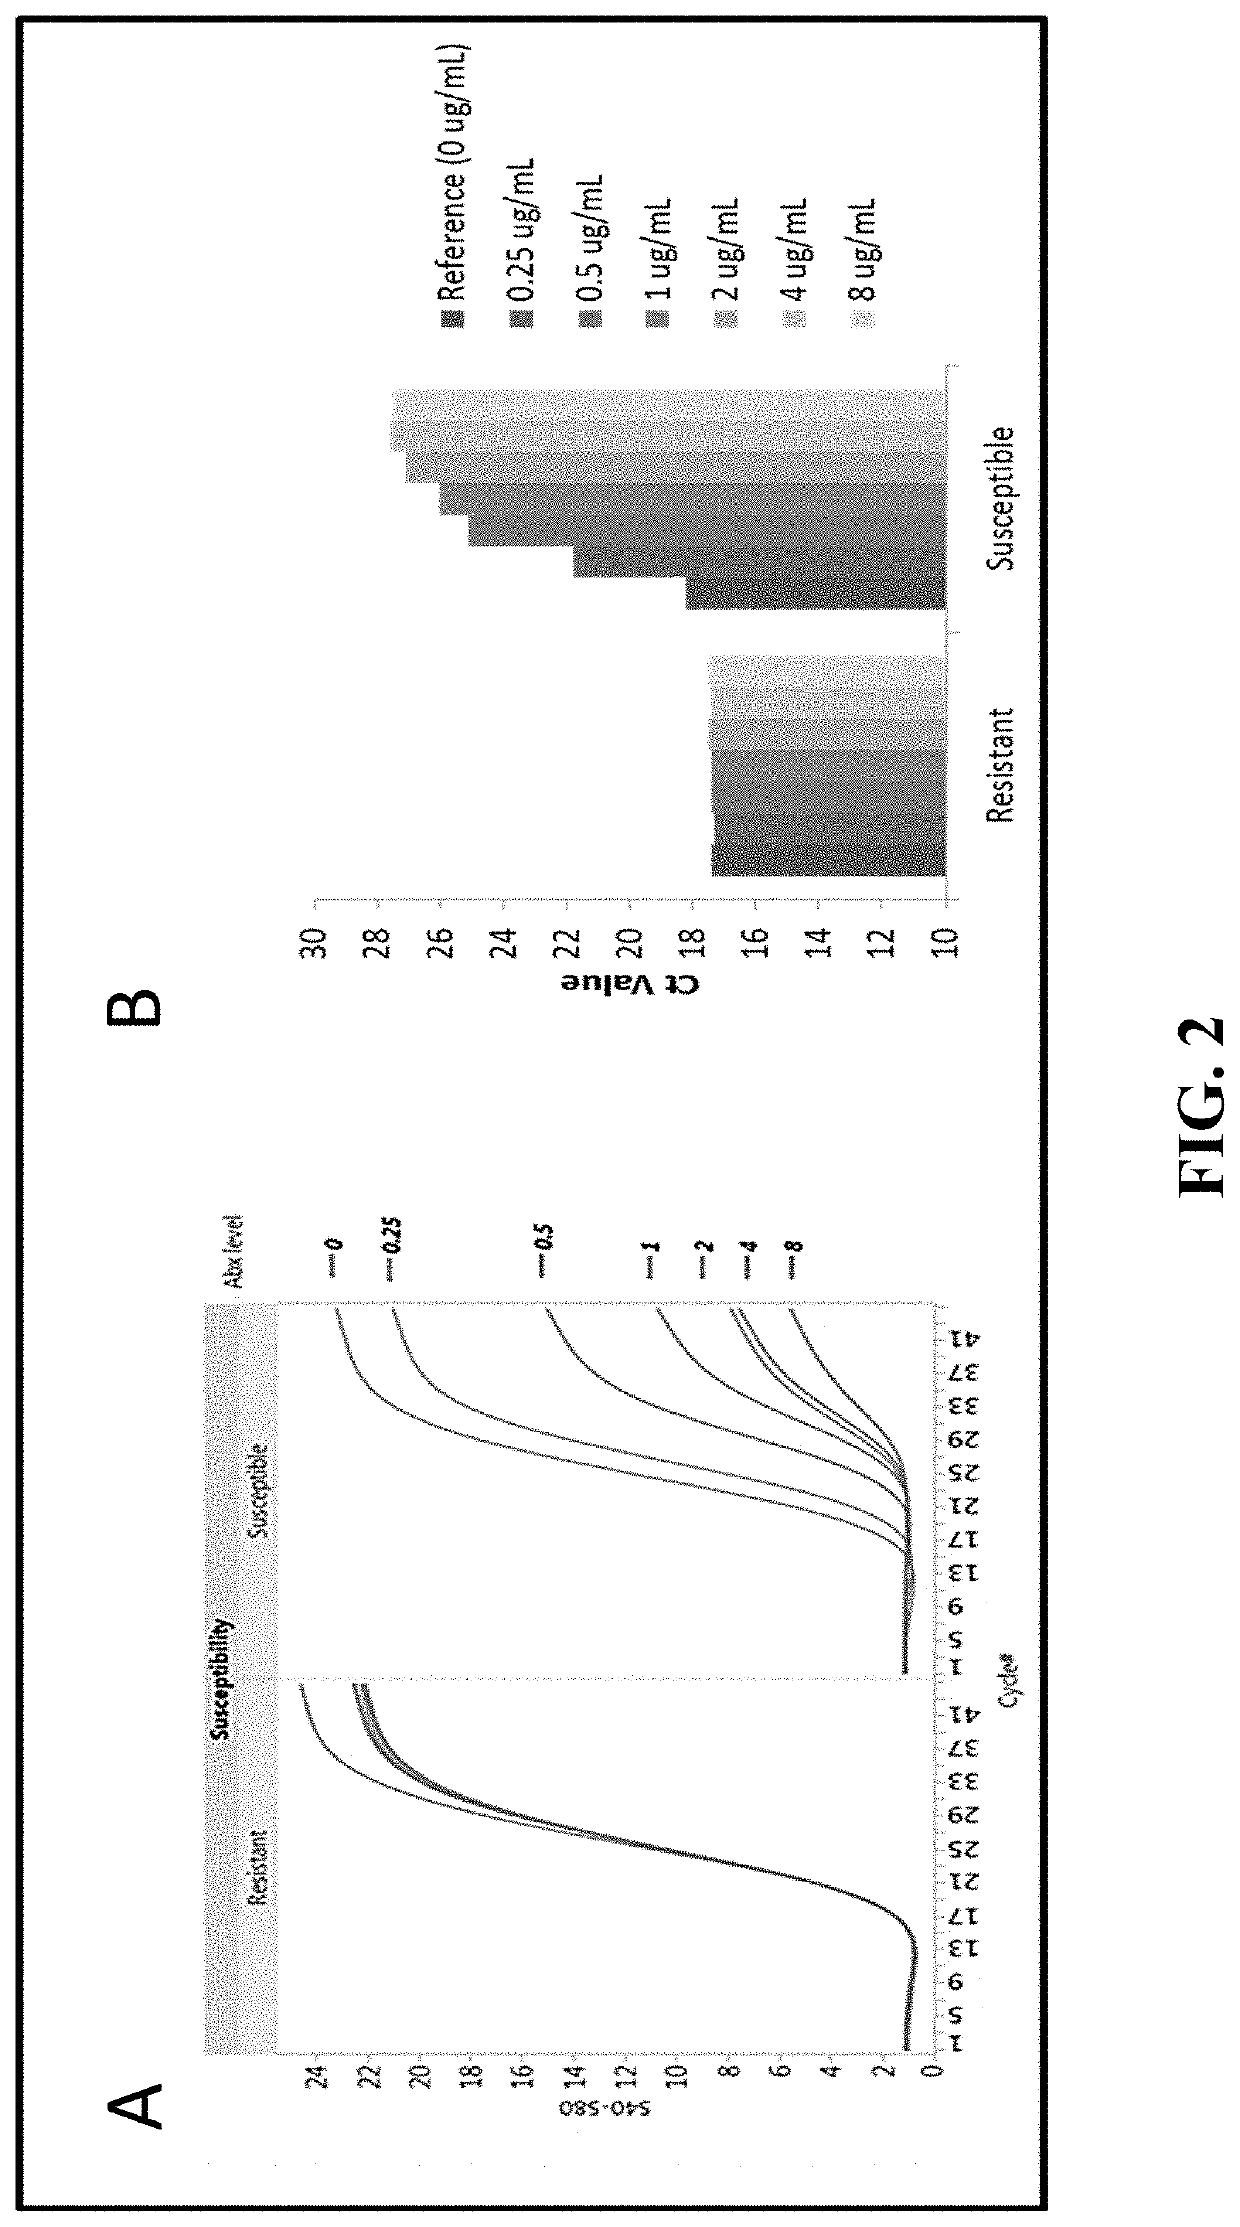 Compositions and methods for rapid identification and phenotypic antimicrobial susceptibility testing of bacteria and fungi